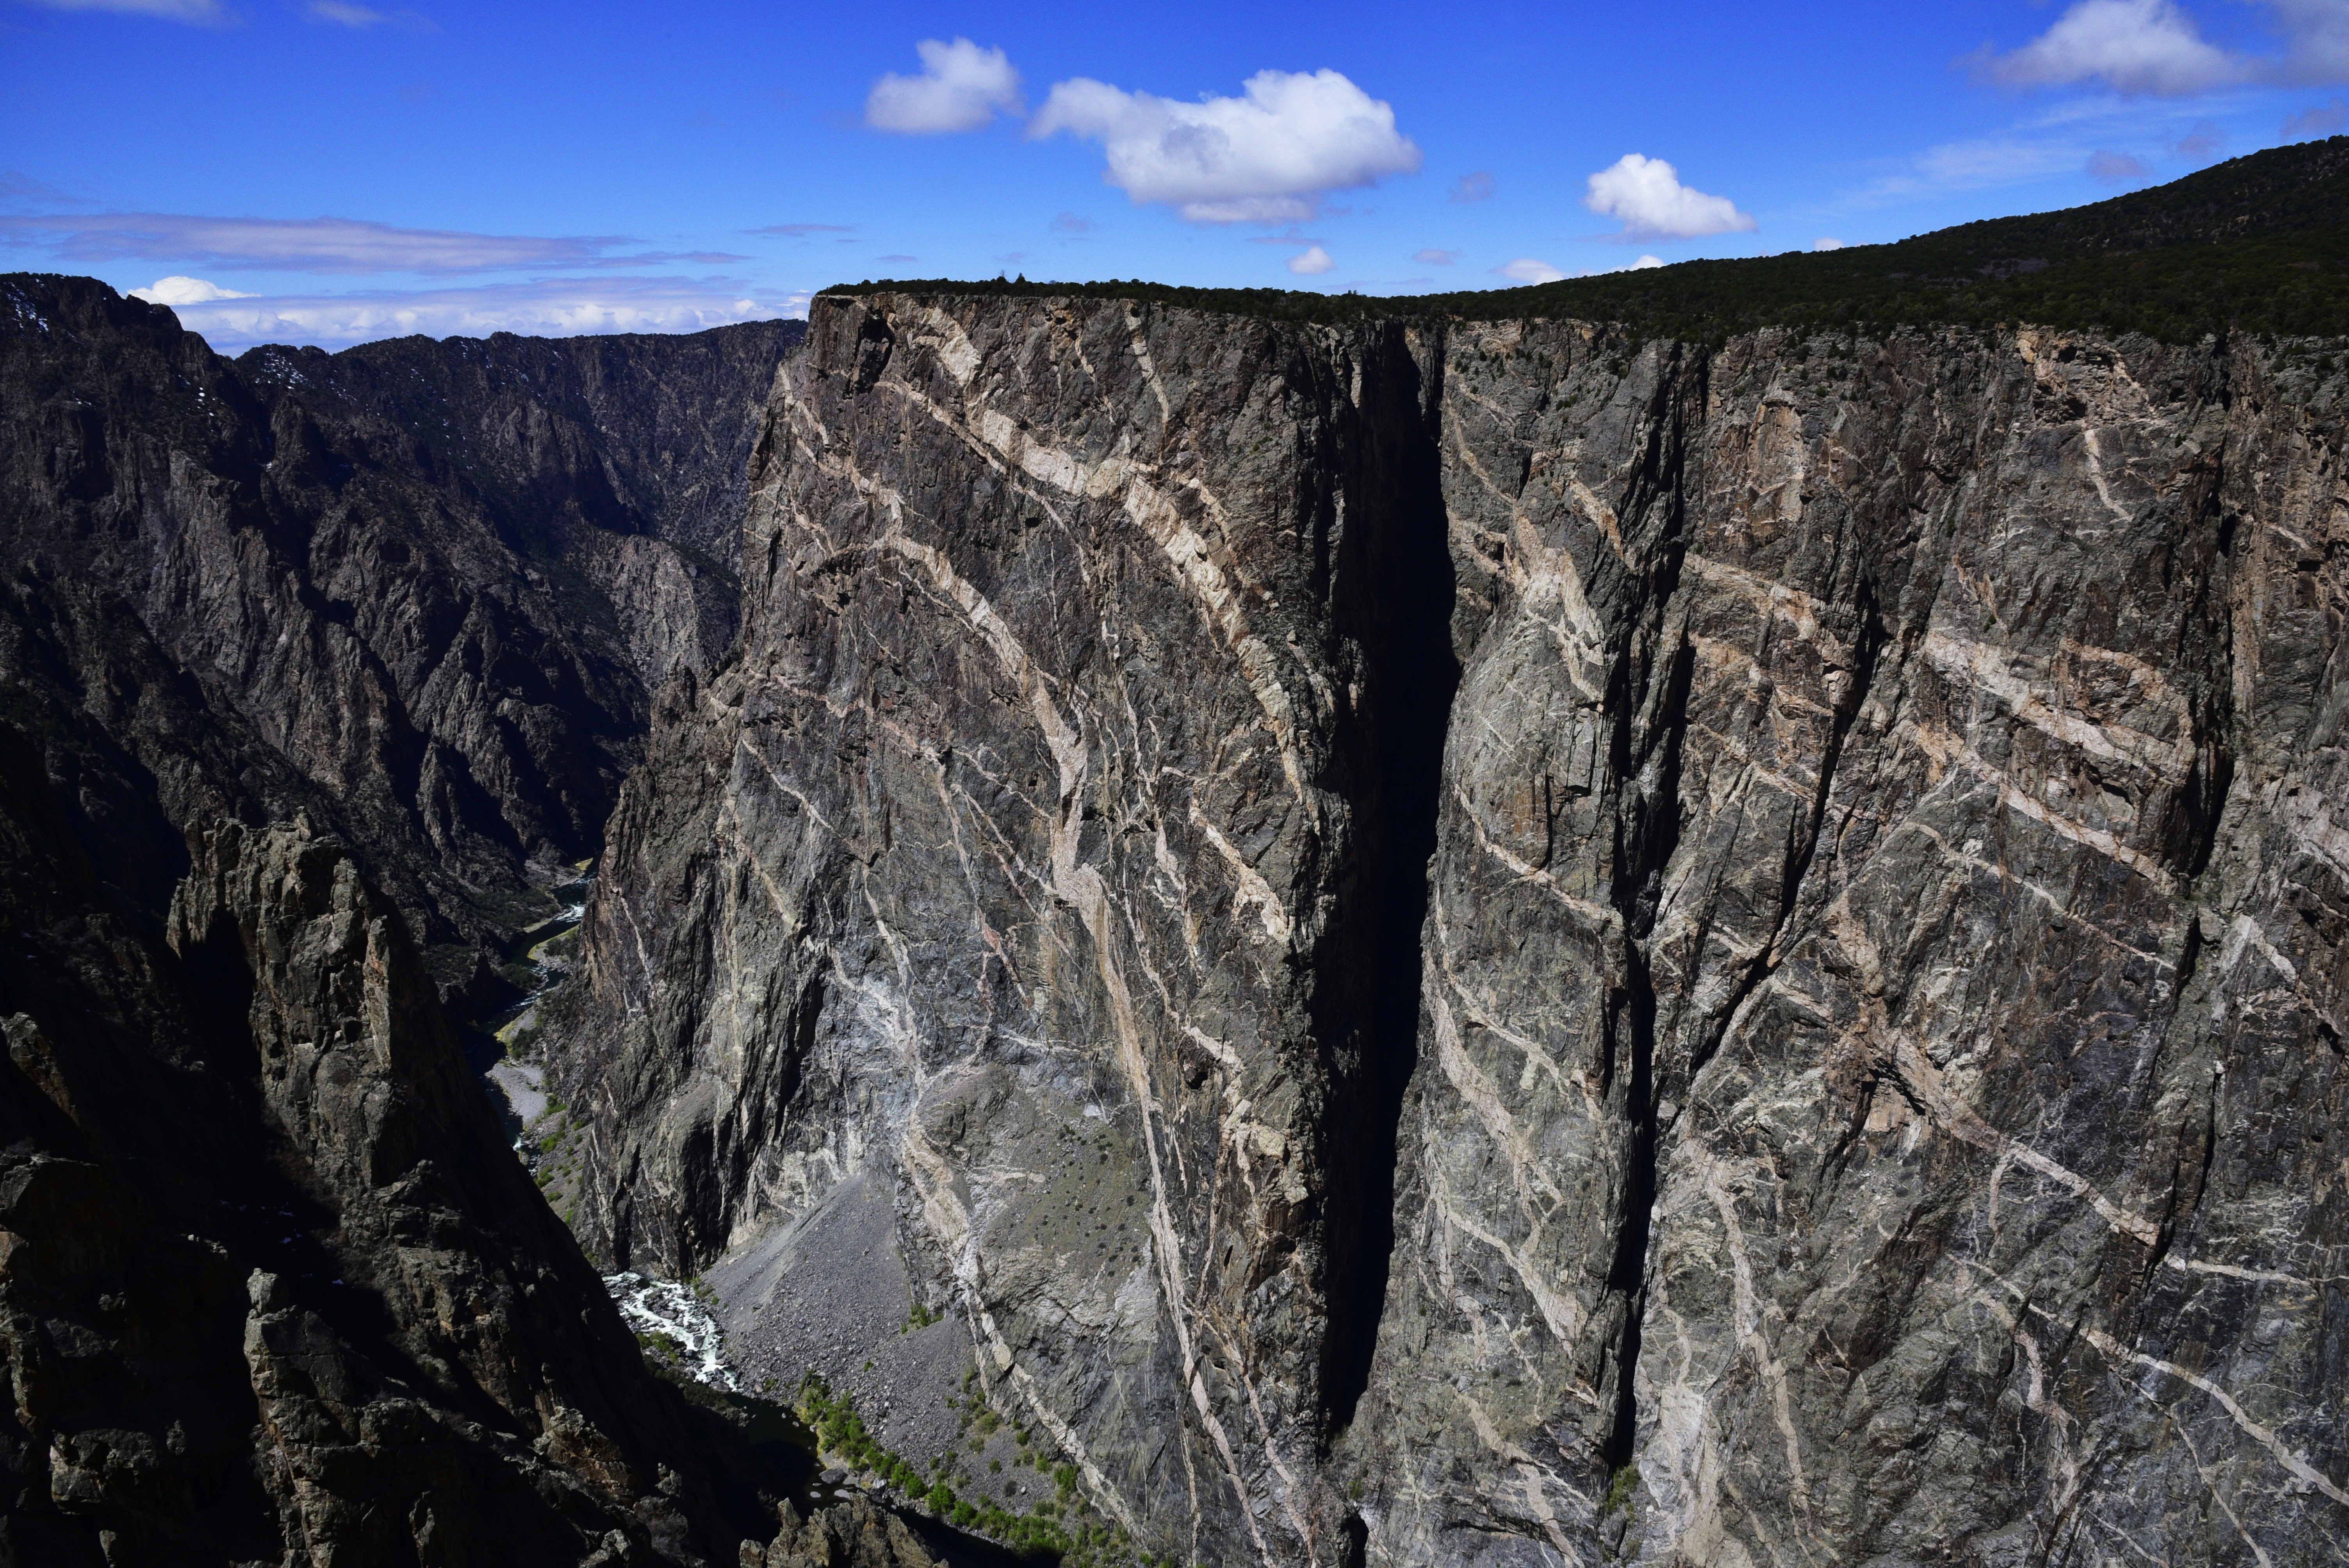 The Painted Wall  -  Black Canyon of the Gunnison National Park, Colorado  